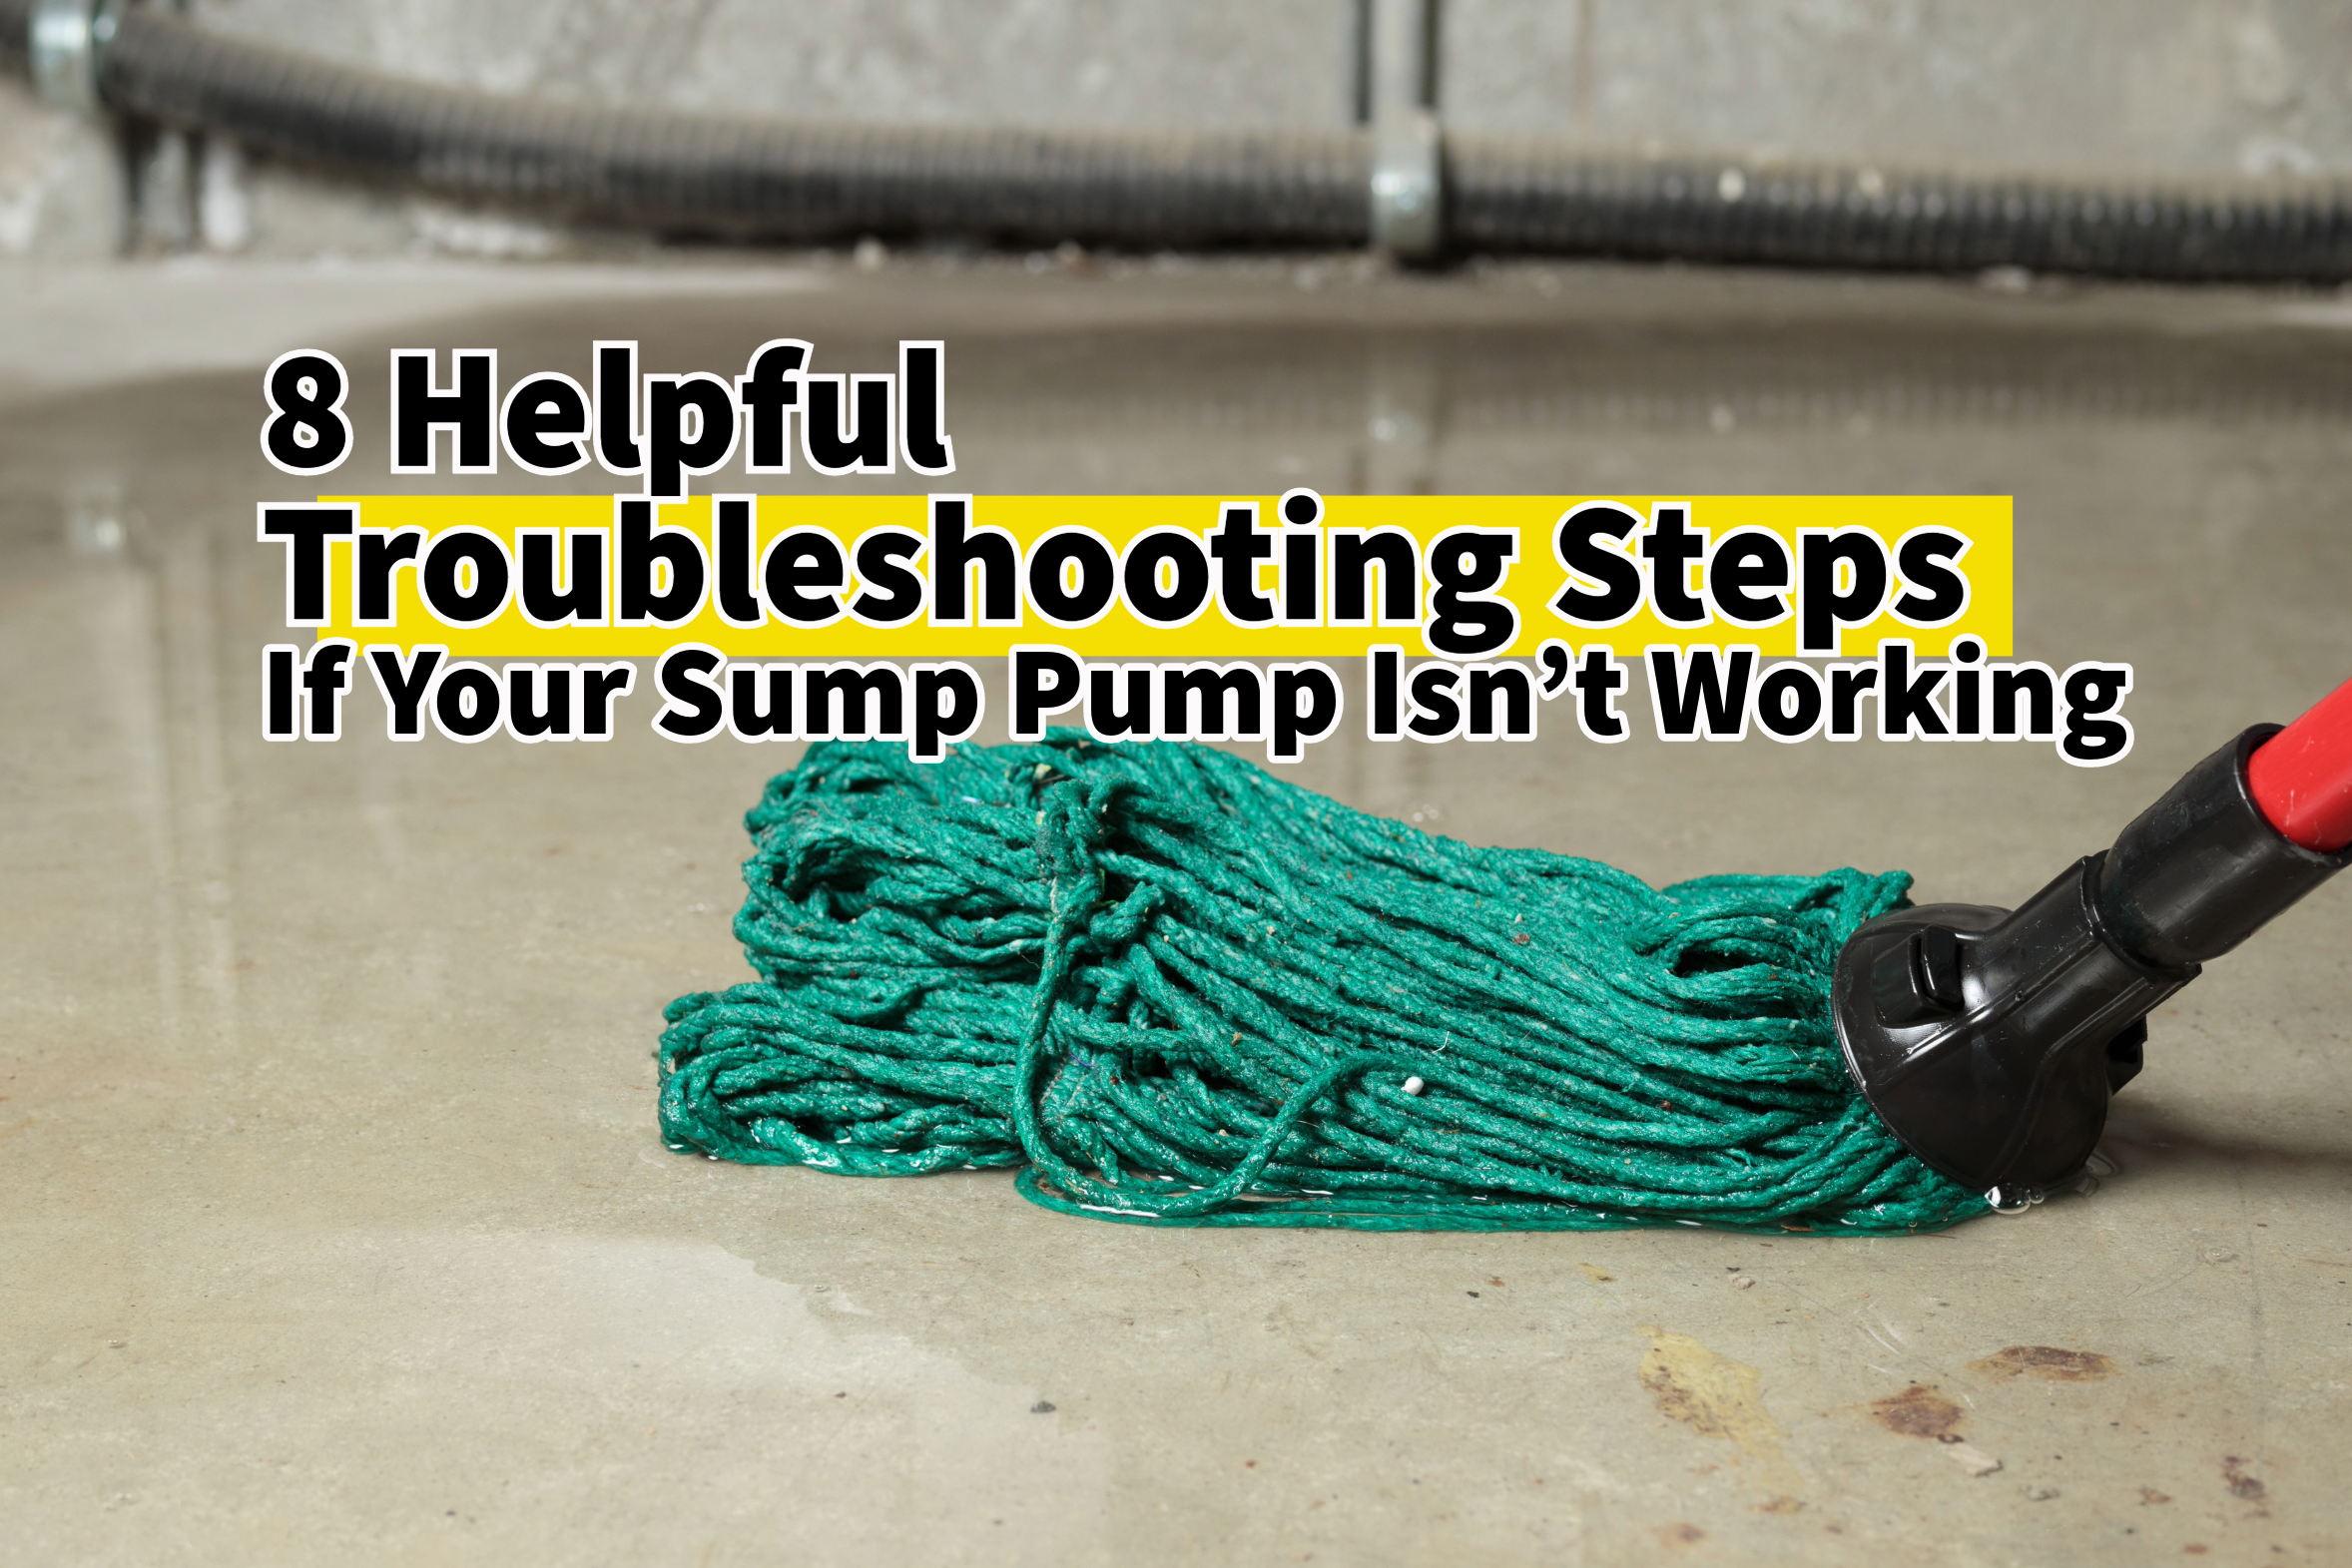 A homeowner’s guide to troubleshooting a malfunctioning sump pump. Plumbing and drain services in Loveland, Ohio.